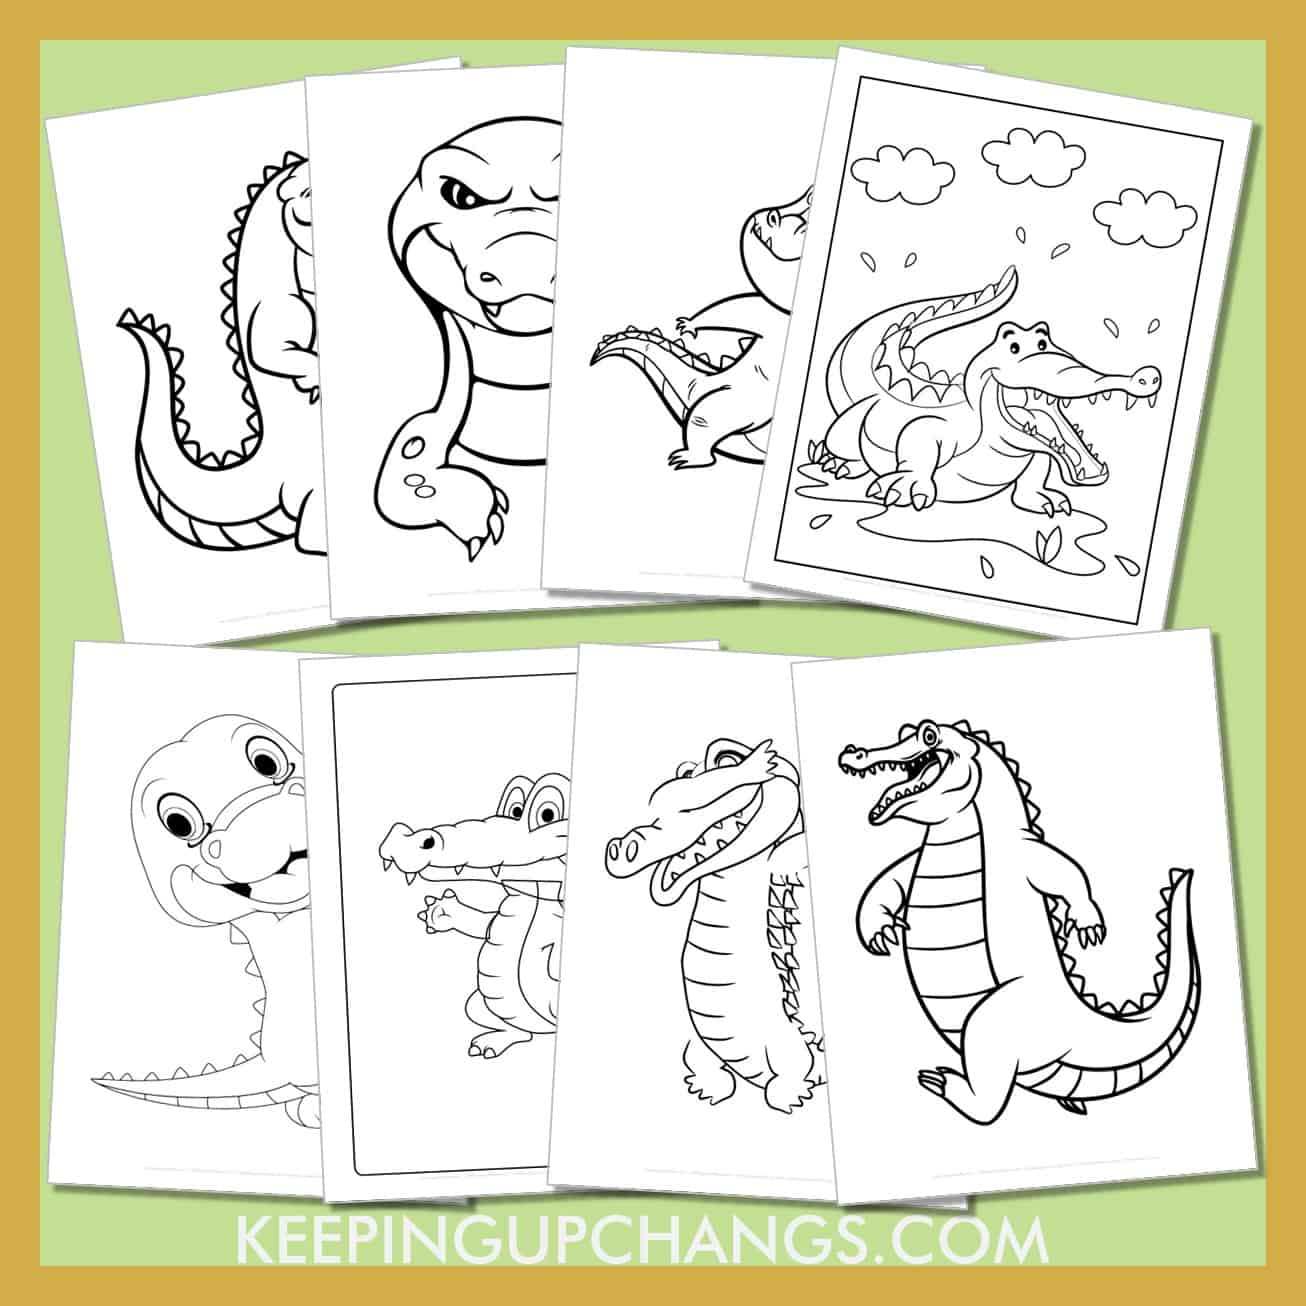 free alligators, crocodiles to color for toddlers, kids, adults.